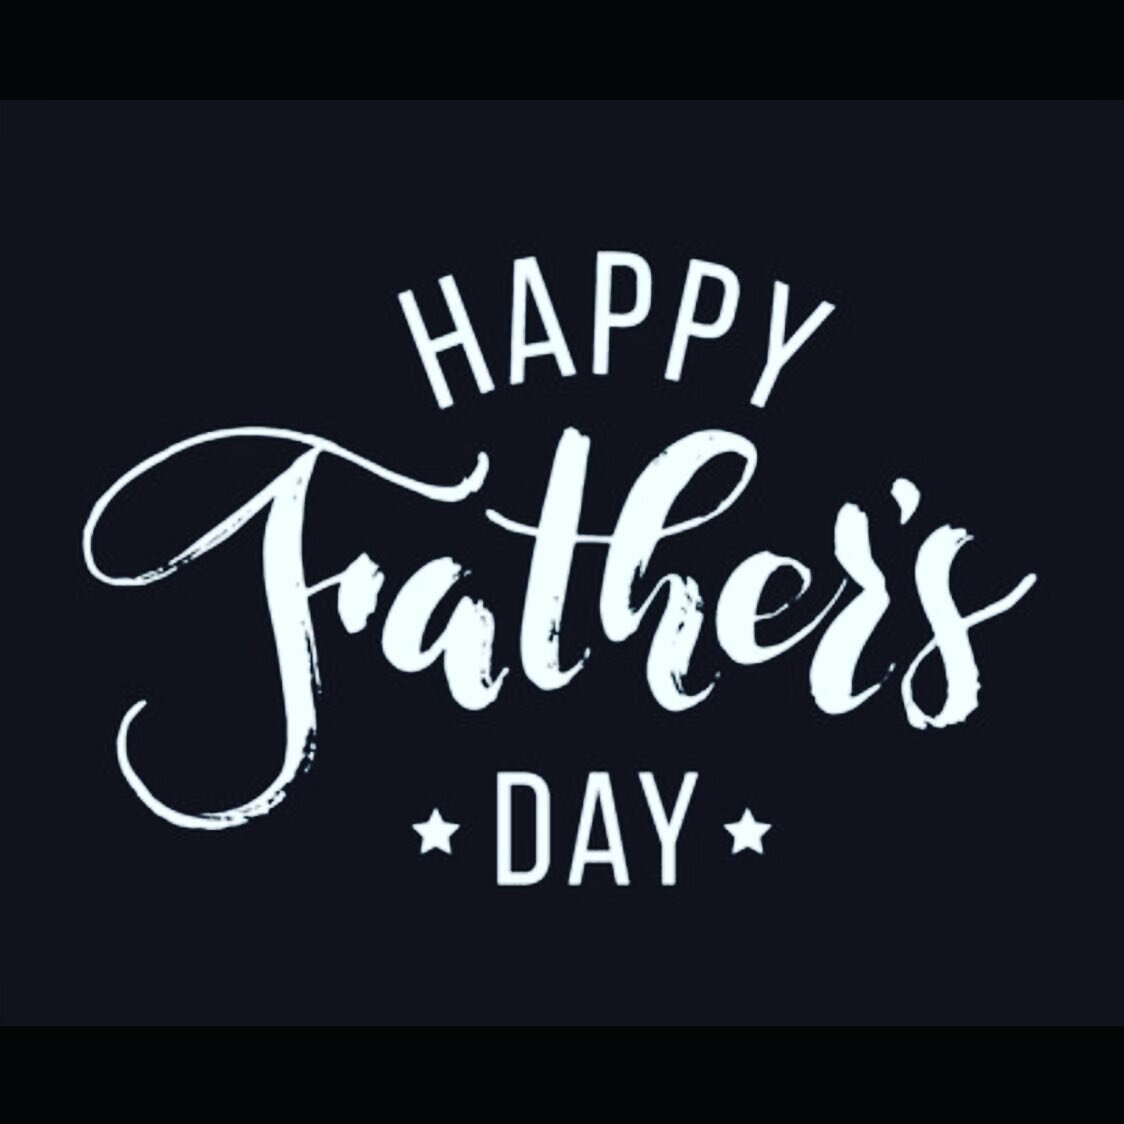 Happy Fathers Day to all of the fathers out there!